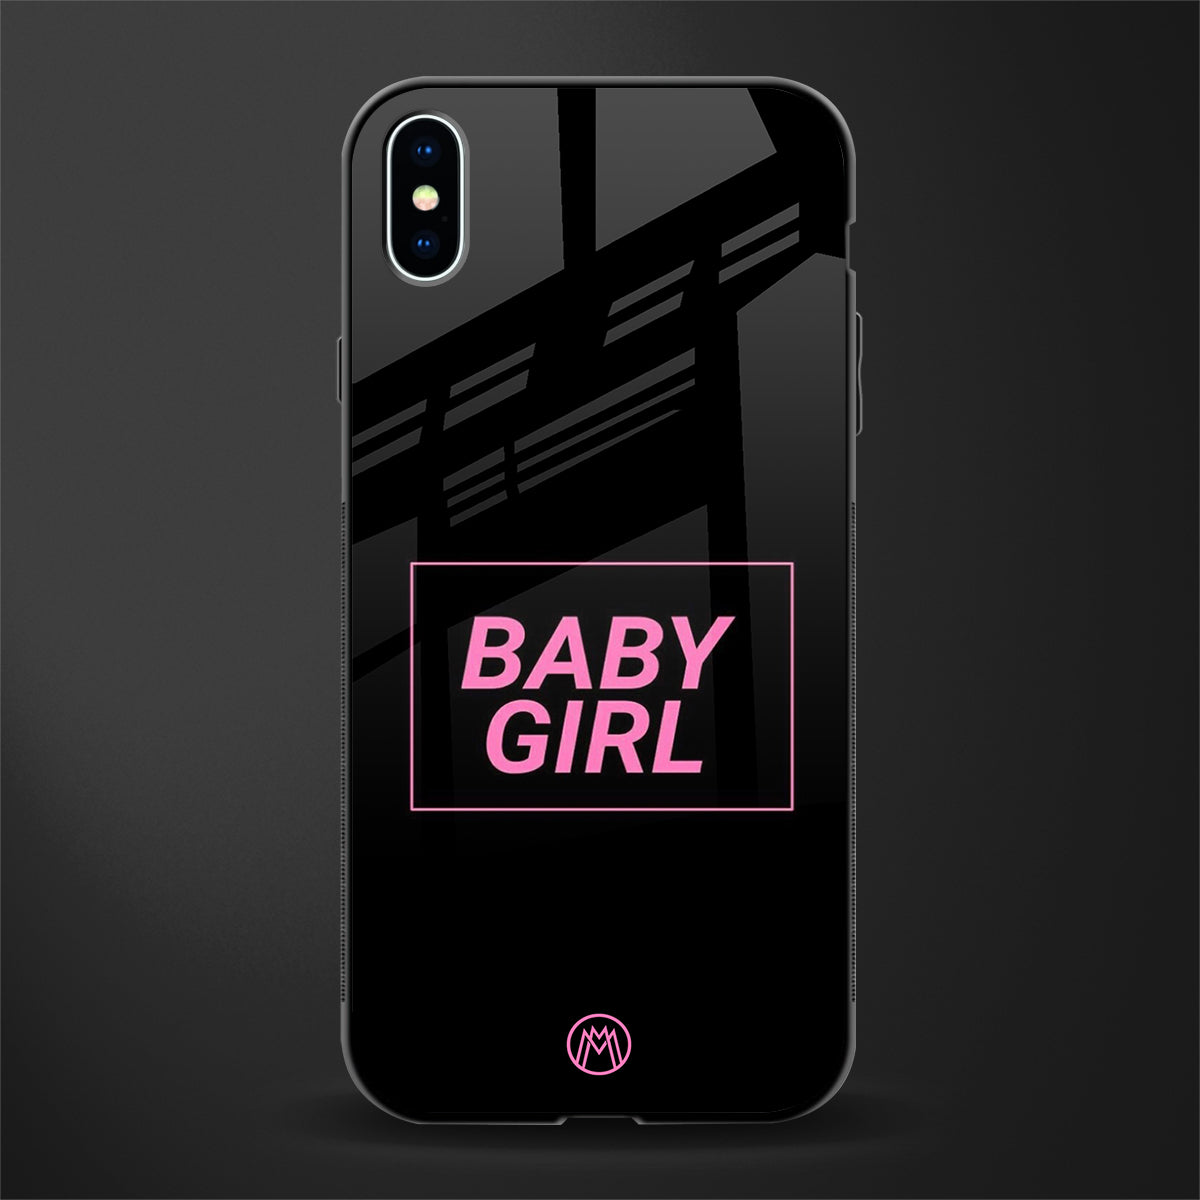 baby girl glass case for iphone xs max image